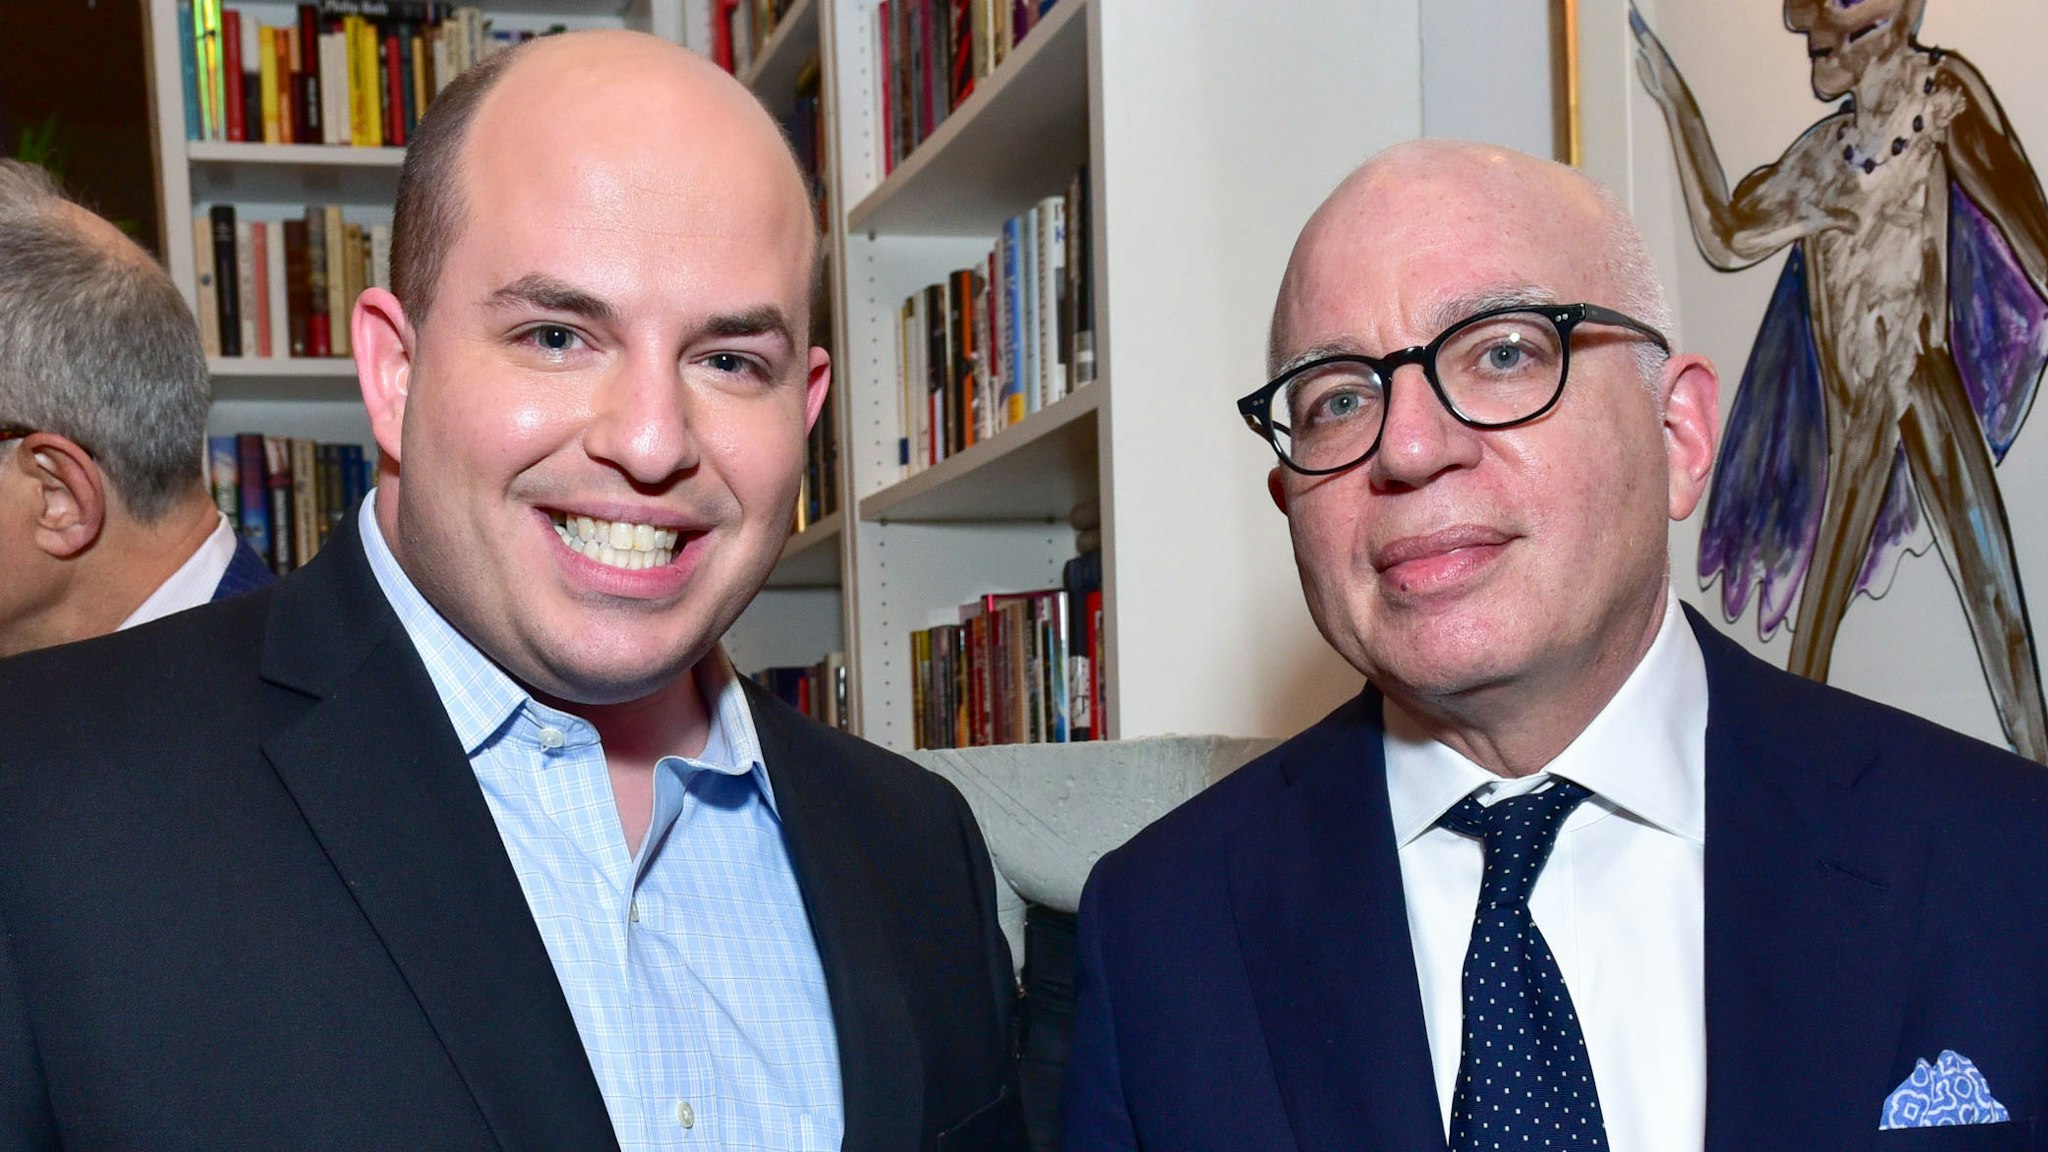 NEW YORK, NY - JANUARY 17: Brian Stelter and Author Michael Wolff attend publisher Henry Holt toasts Michael Wolff's "Fire and Fury" at Private Residence on January 17, 2018 in New York City.